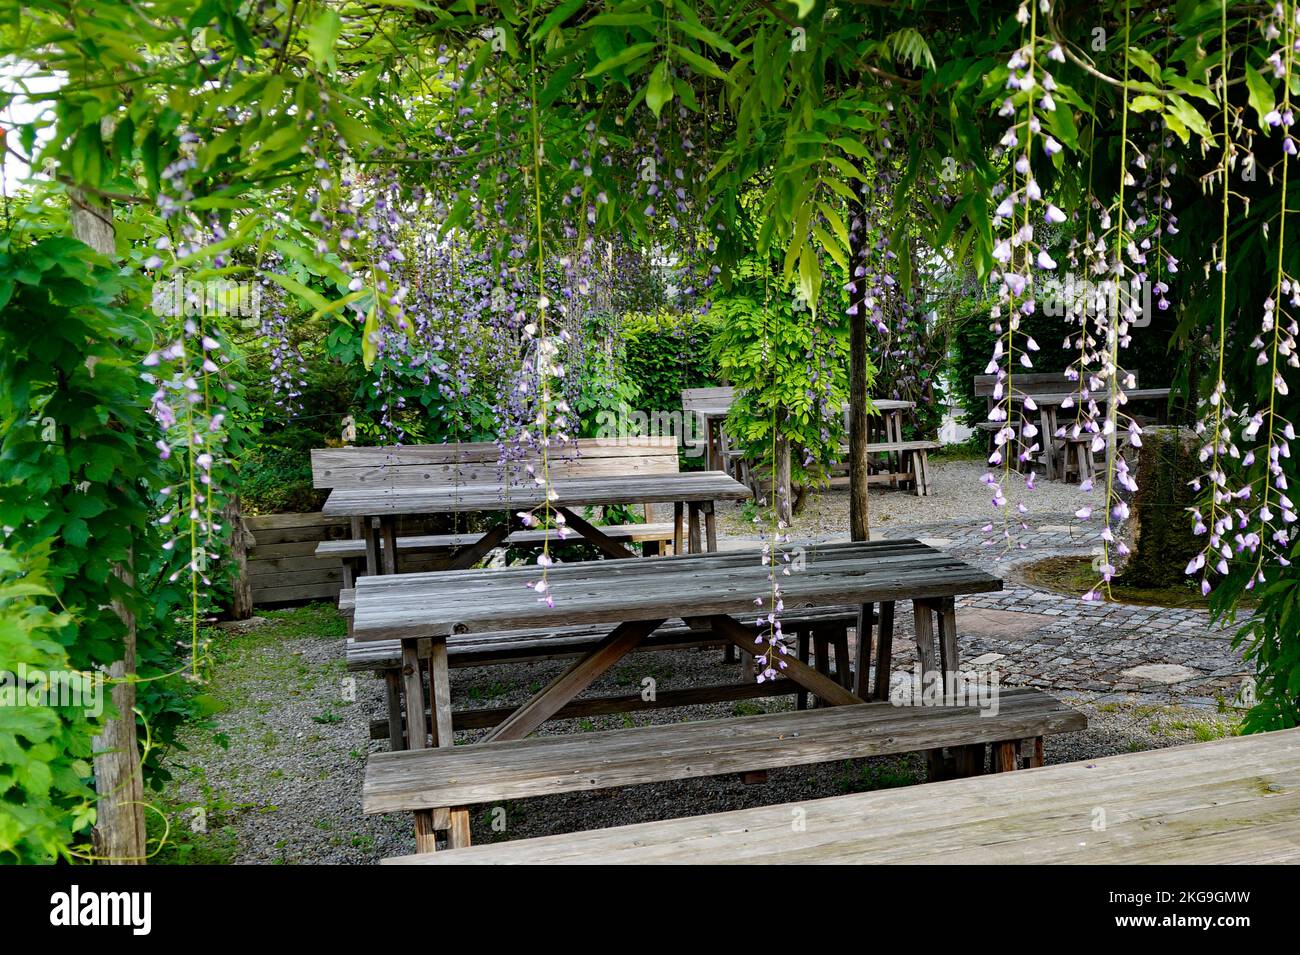 romantic beer garden with wooden benches and tables surrounded by lush greenery and flowers of Chinese wisteria on a fine spring day in Bavaria Stock Photo